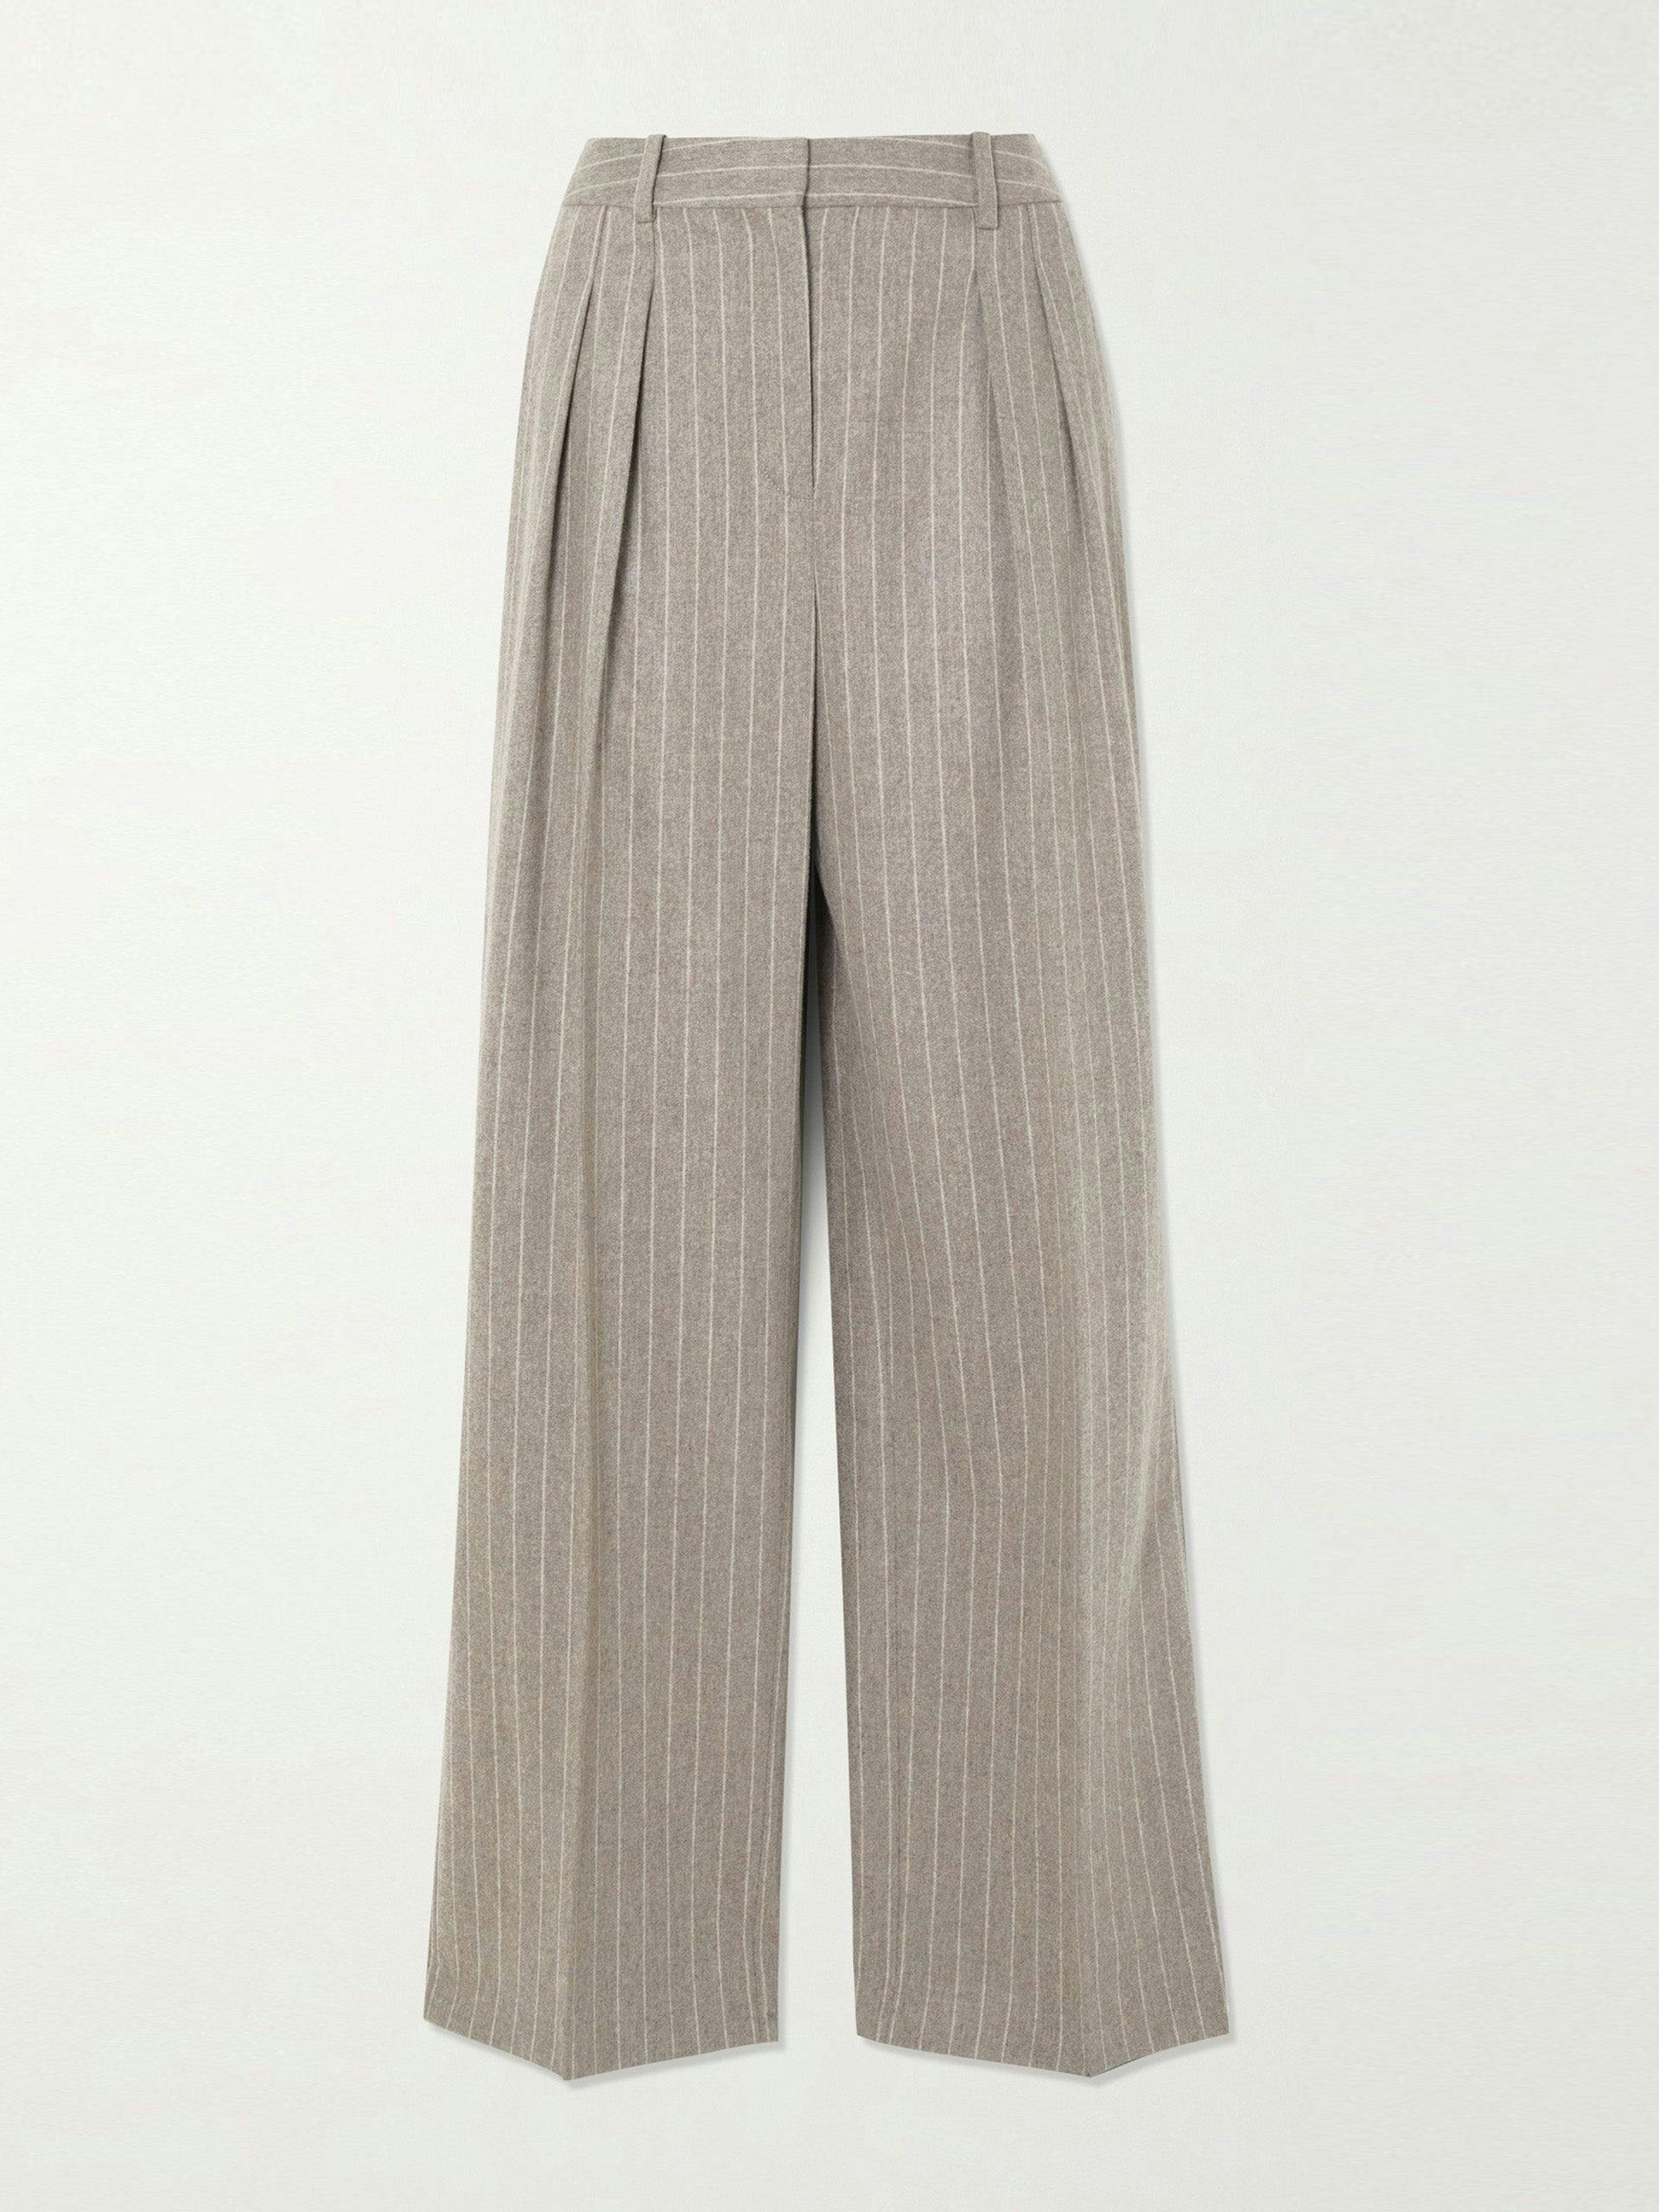 Beige pleated pinstriped wool and cashmere-blend wide-leg pants